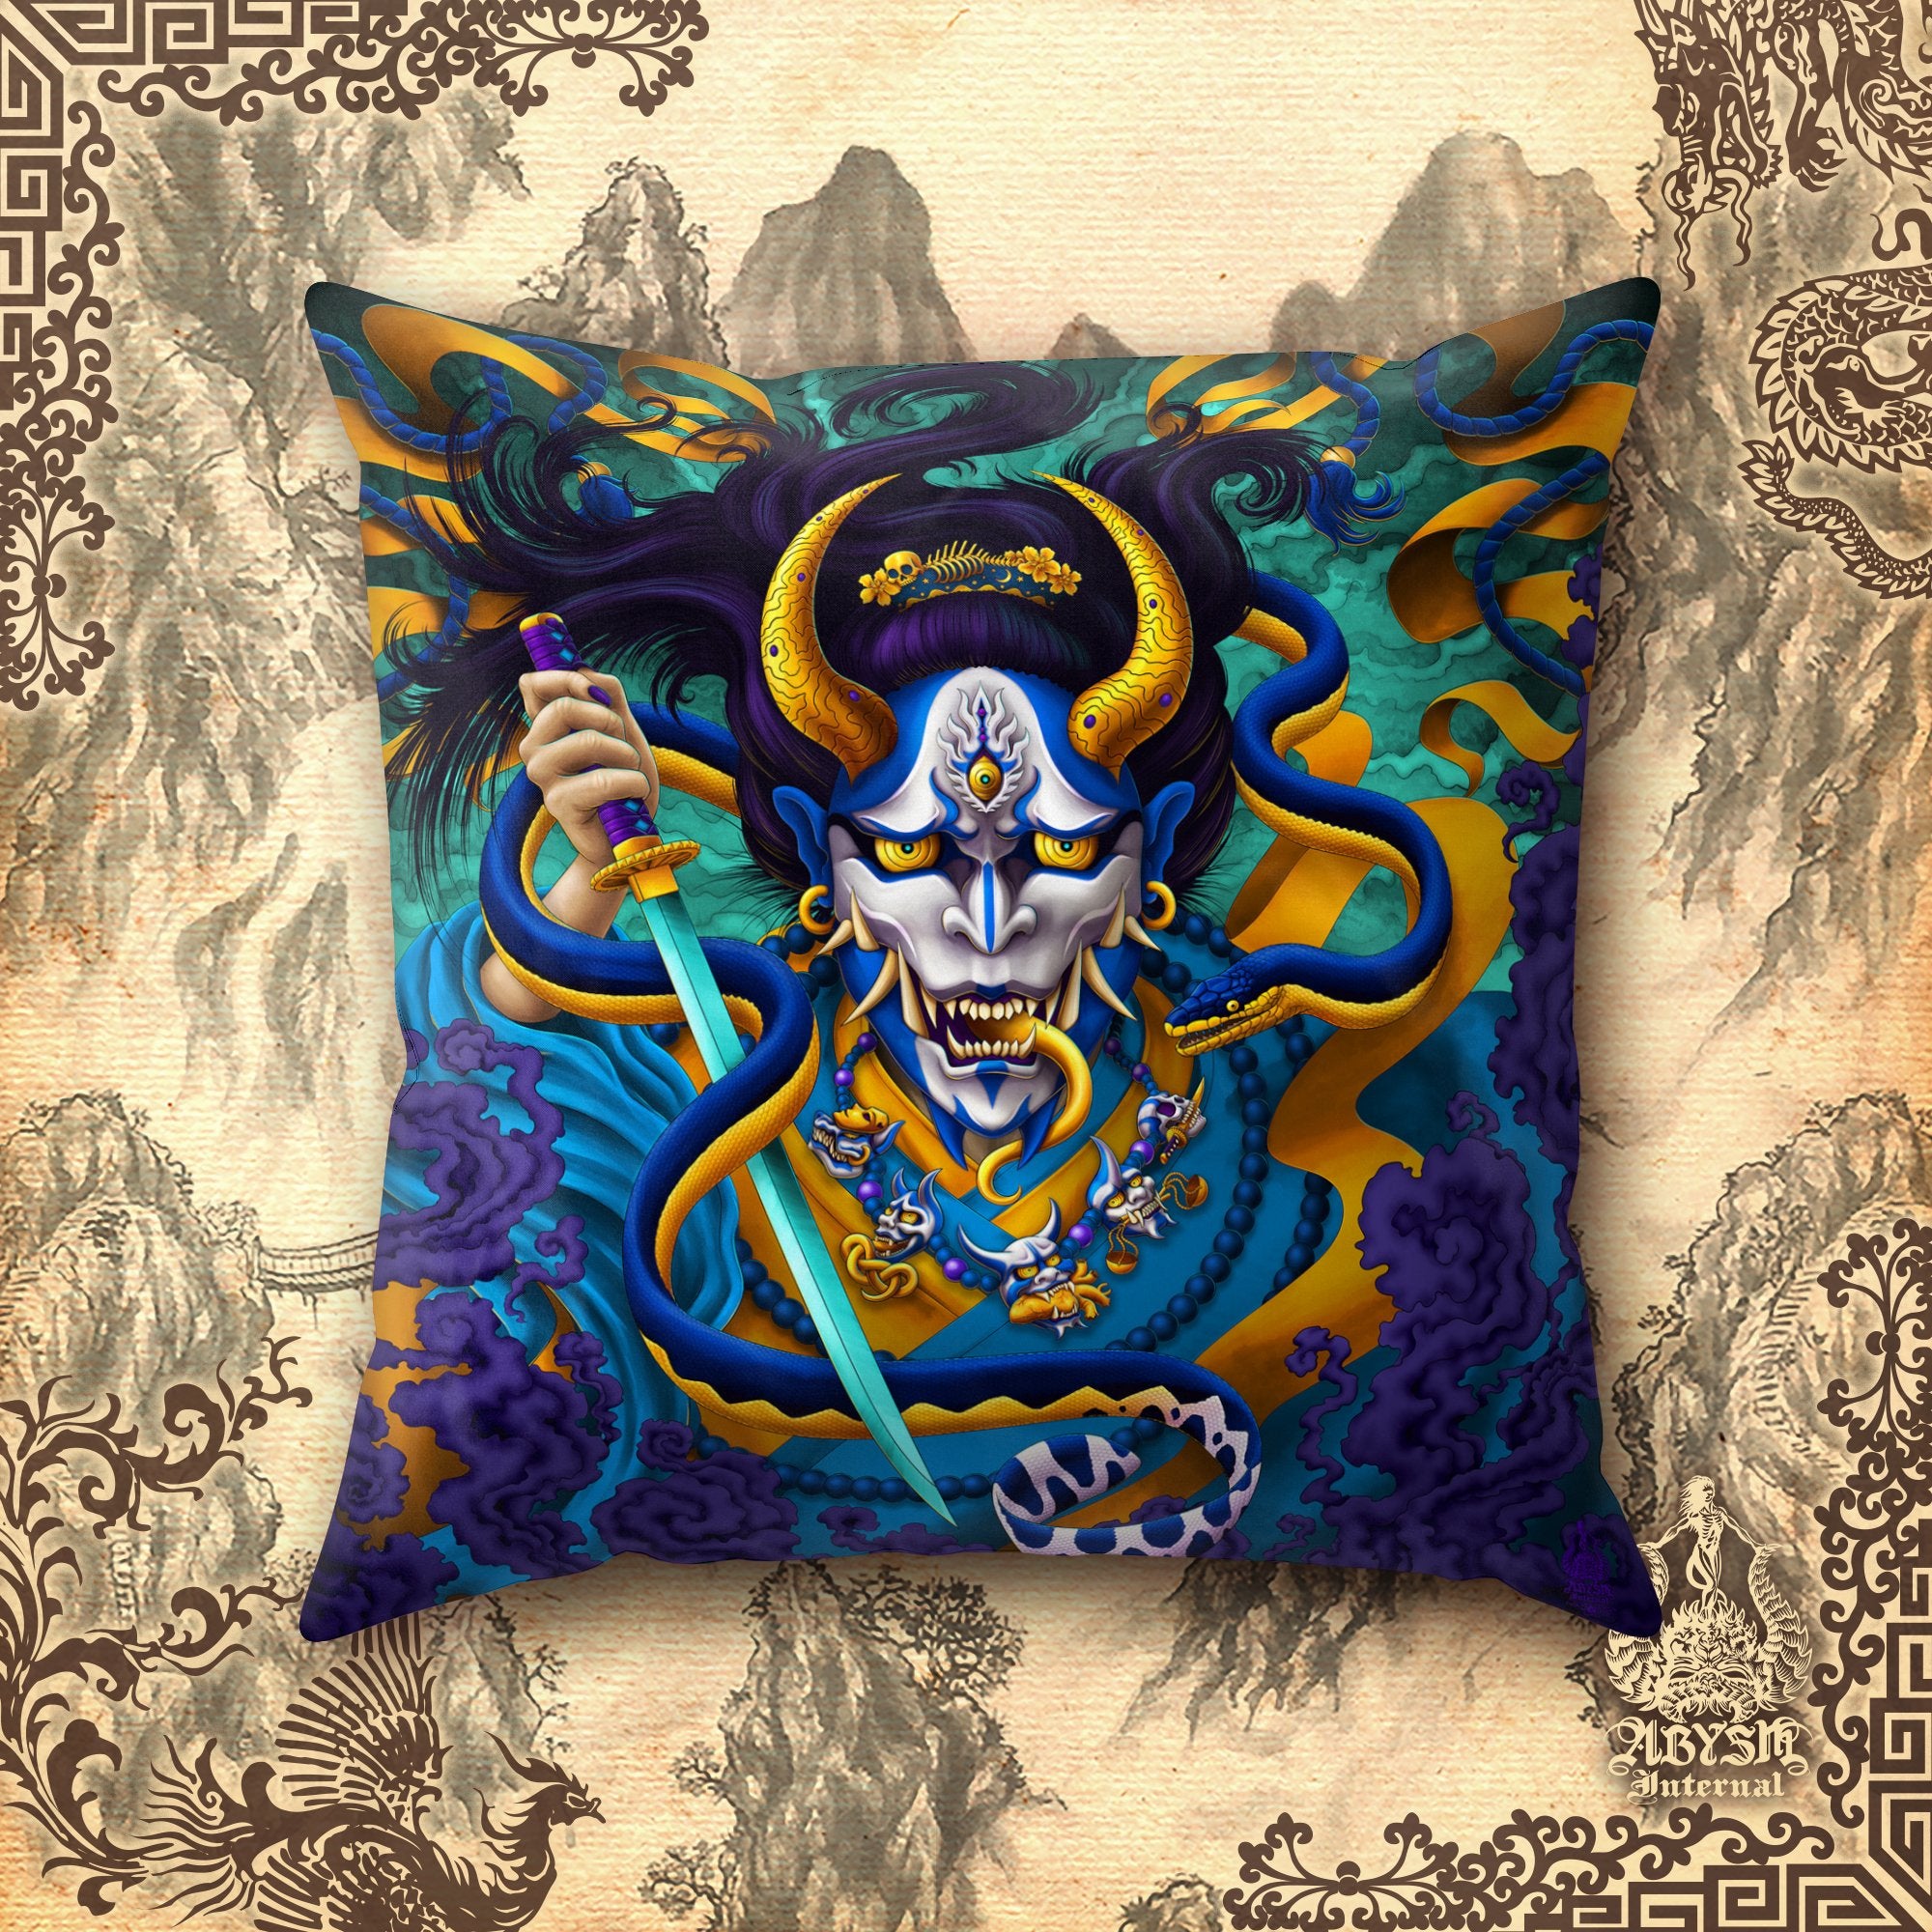 Hannya Throw Pillow, Decorative Accent Pillow, Square Cushion Cover, Japanese Demon & Snake, Gamer Room Decor - Cyan Gold - Abysm Internal